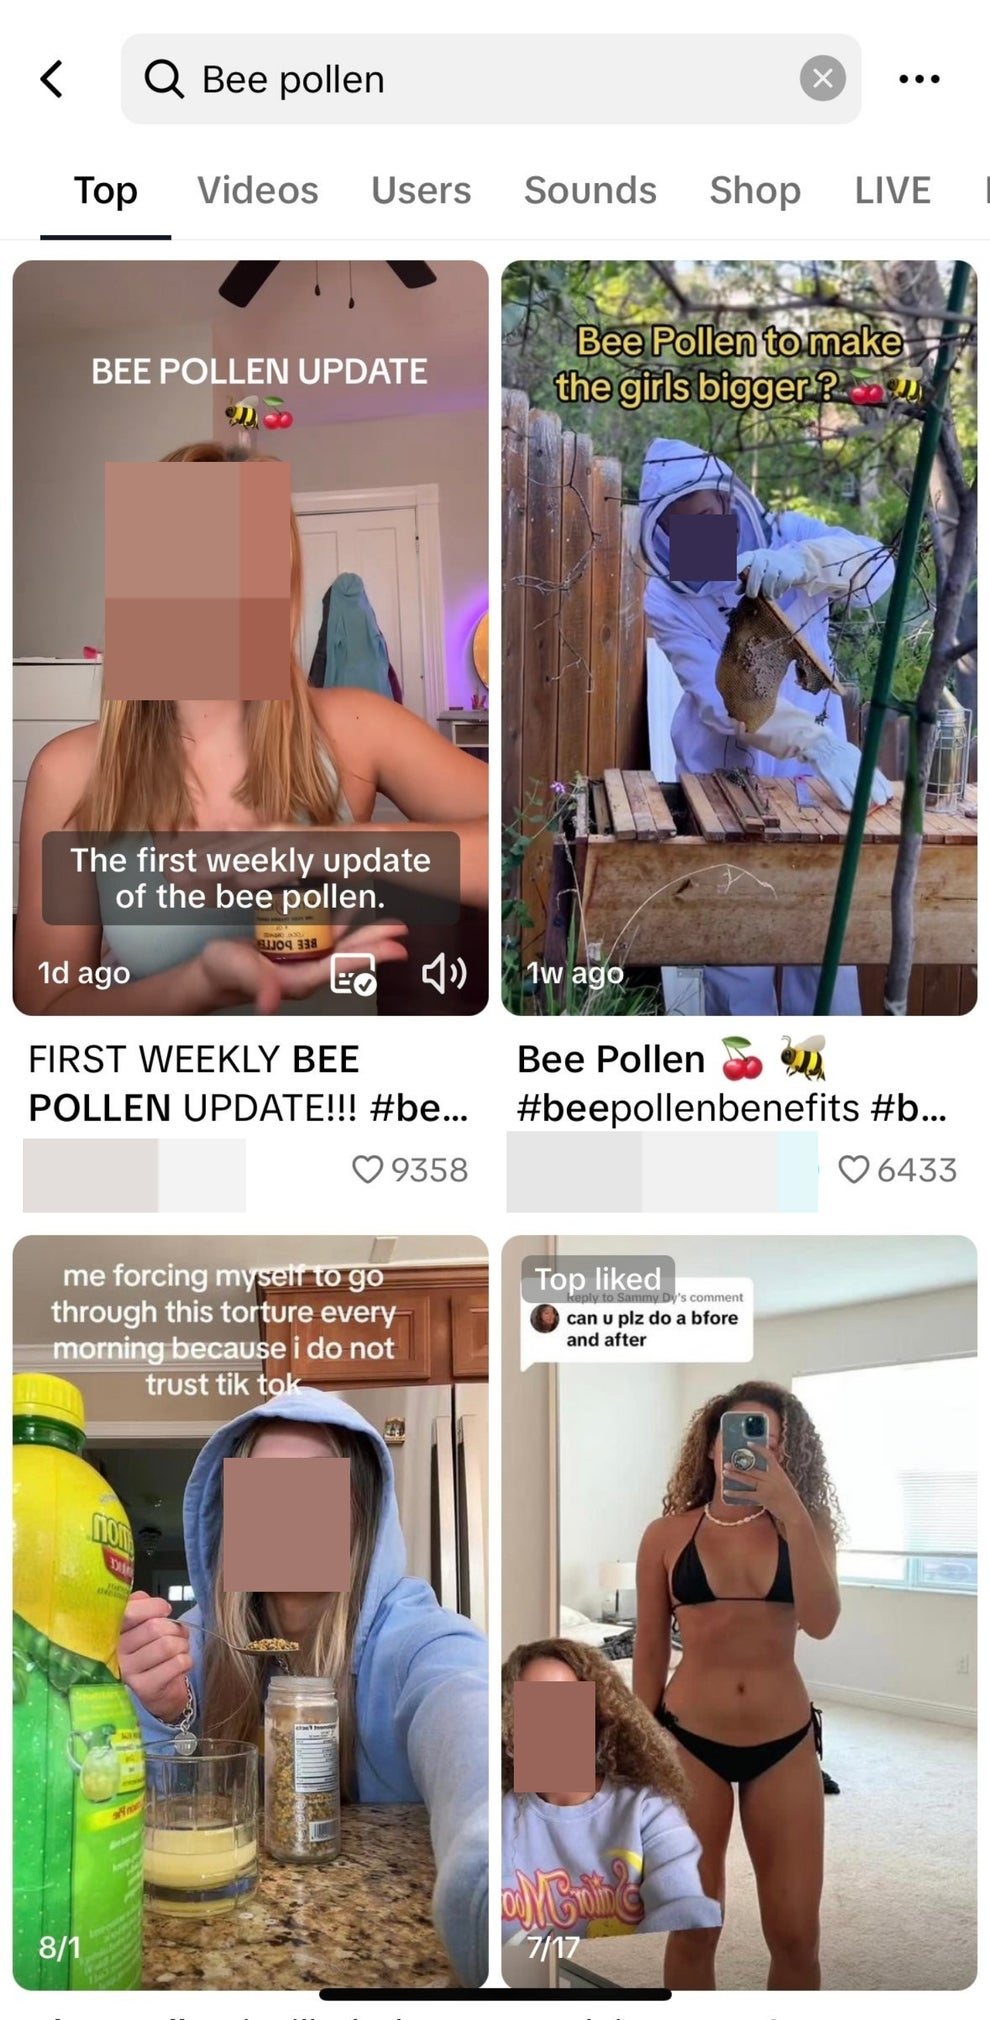 Does Bee Pollen Make Boobs Bigger? Doctor Says There's No Evidence